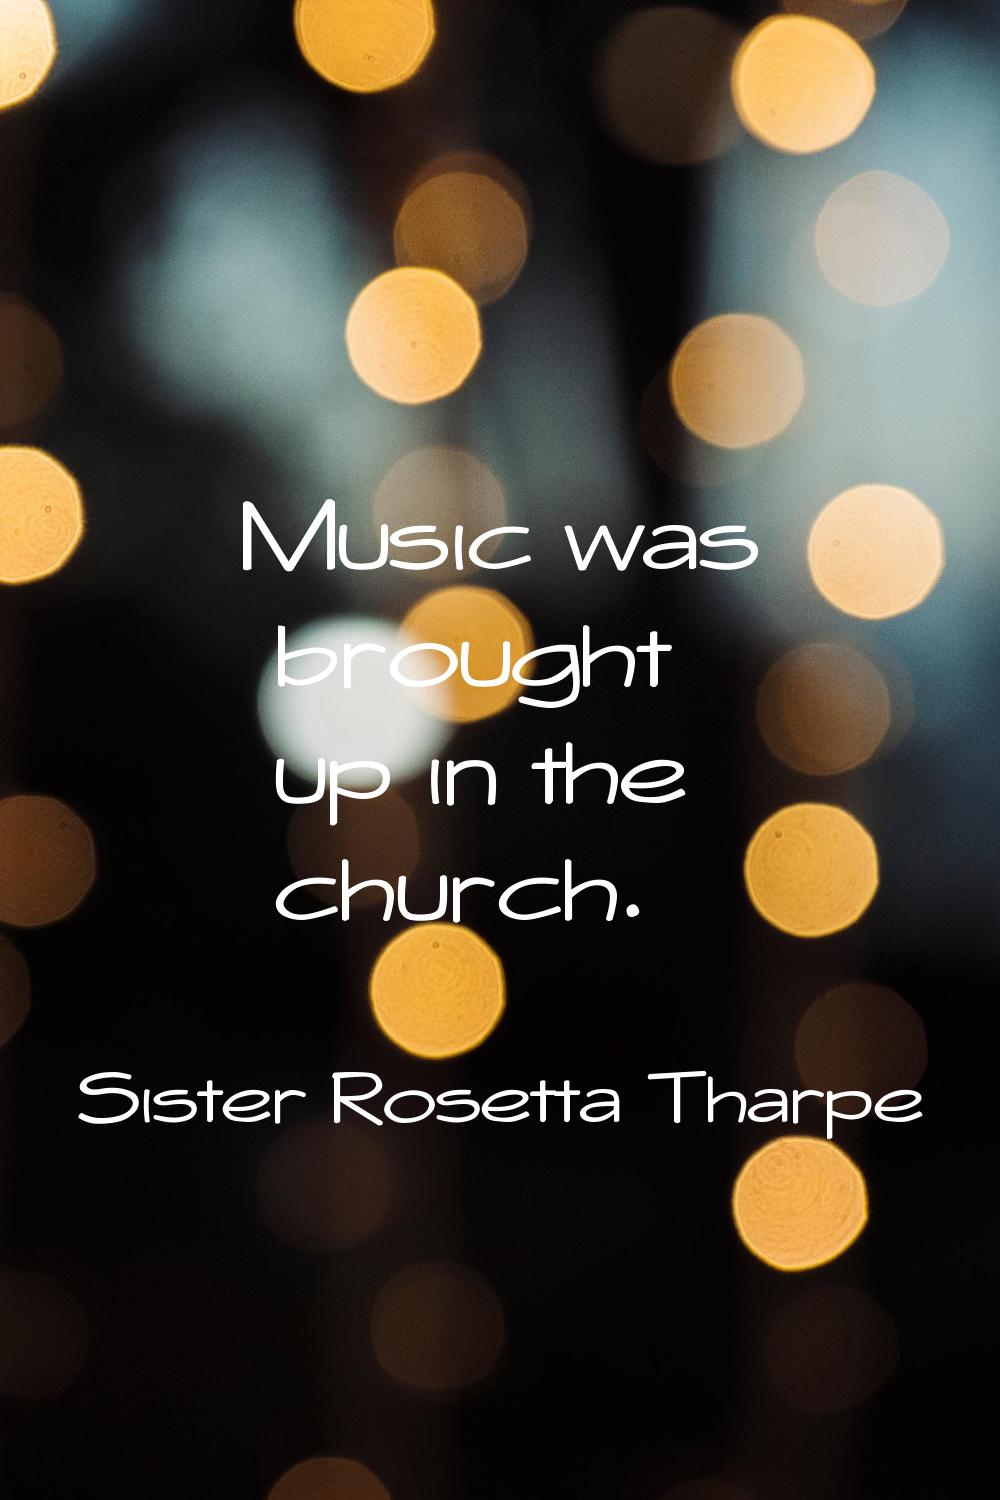 Music was brought up in the church.